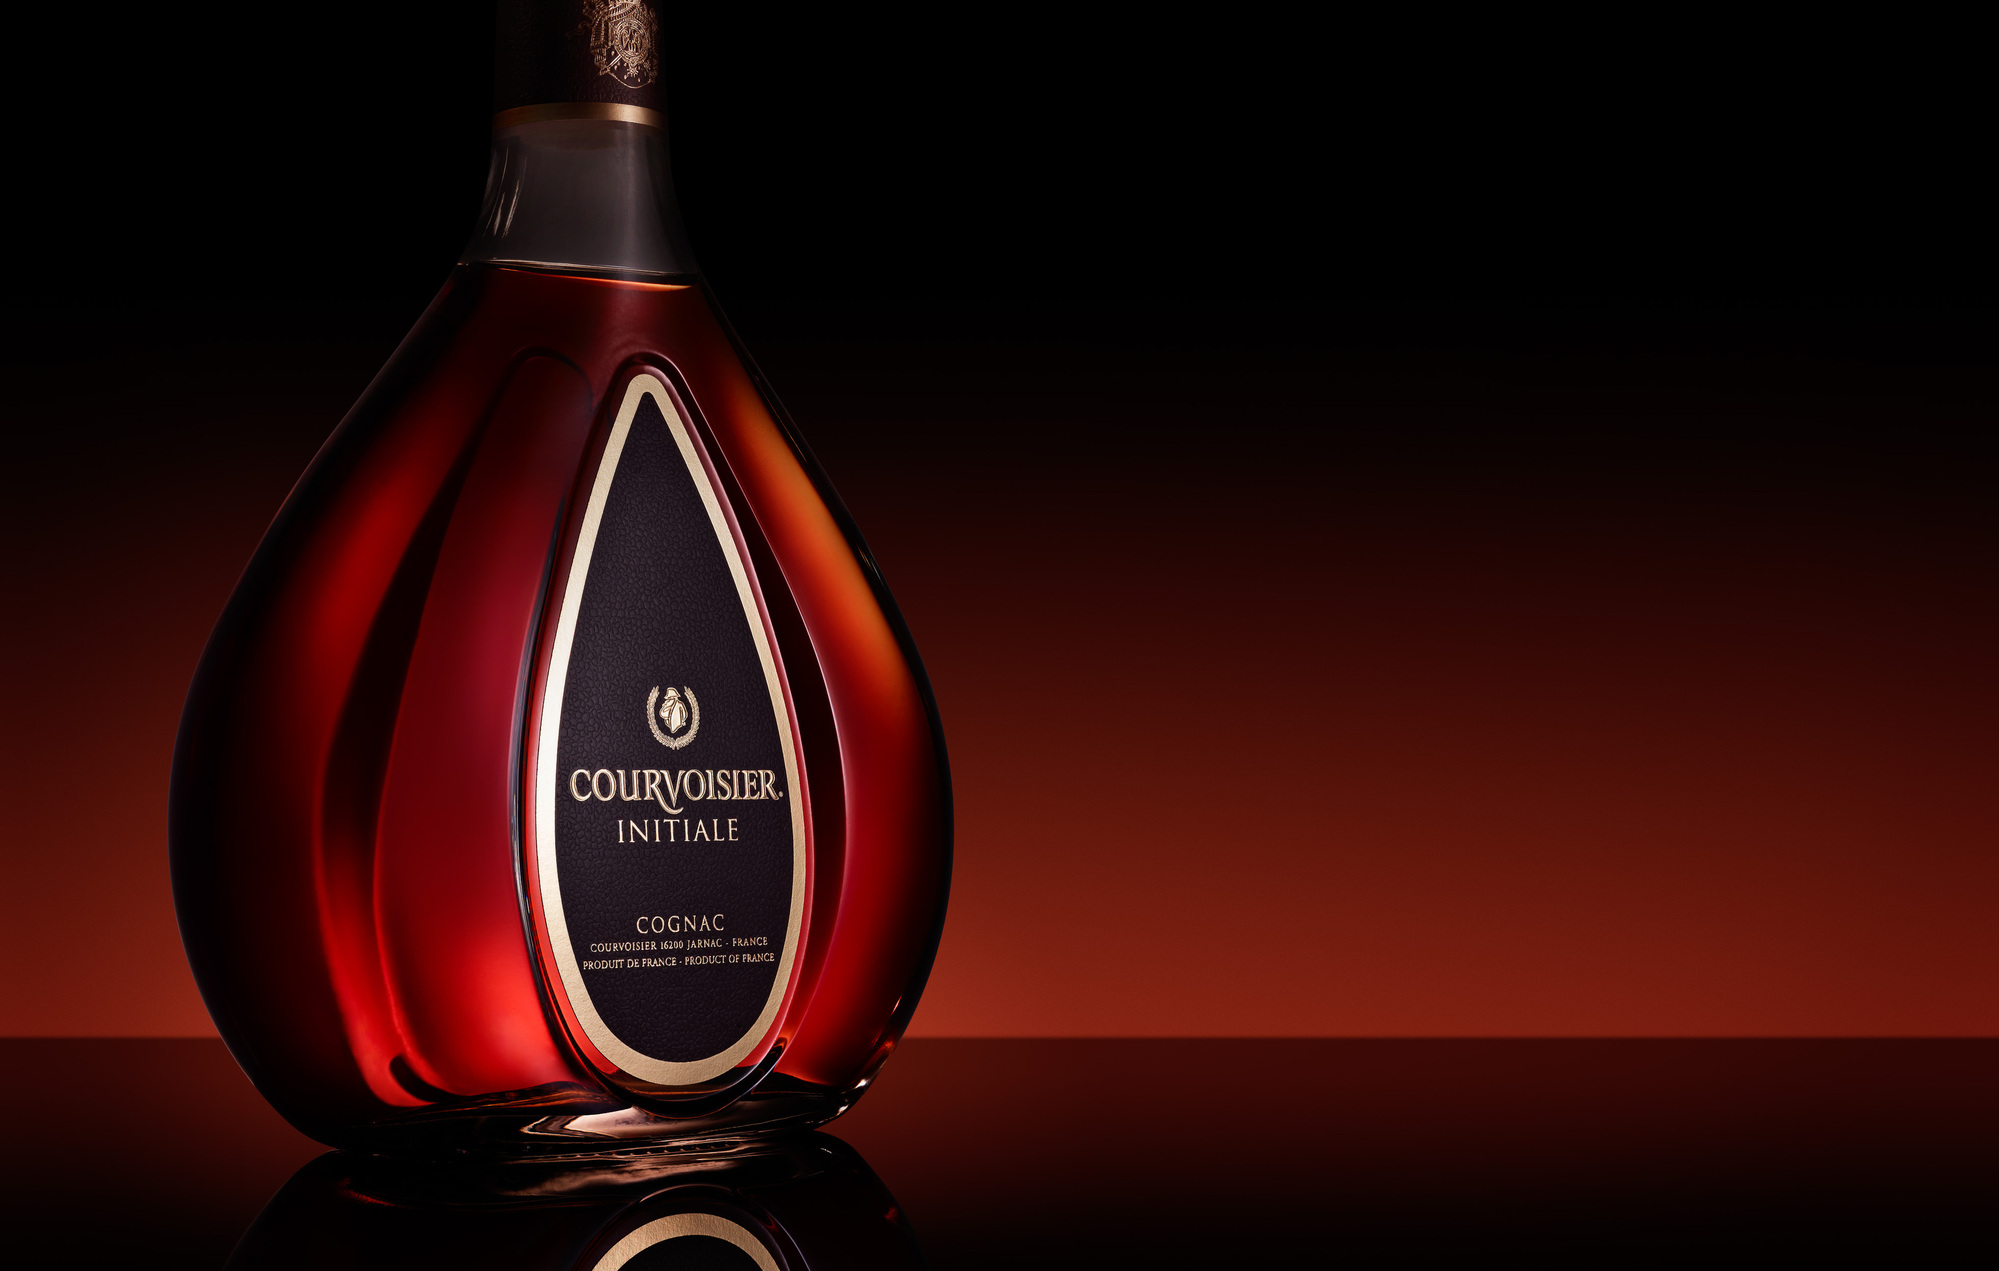 Courvoisier Initiale bottle photography. Beverage and liquid product & advertising photography by Timothy Hogan Studio in Los Angeles